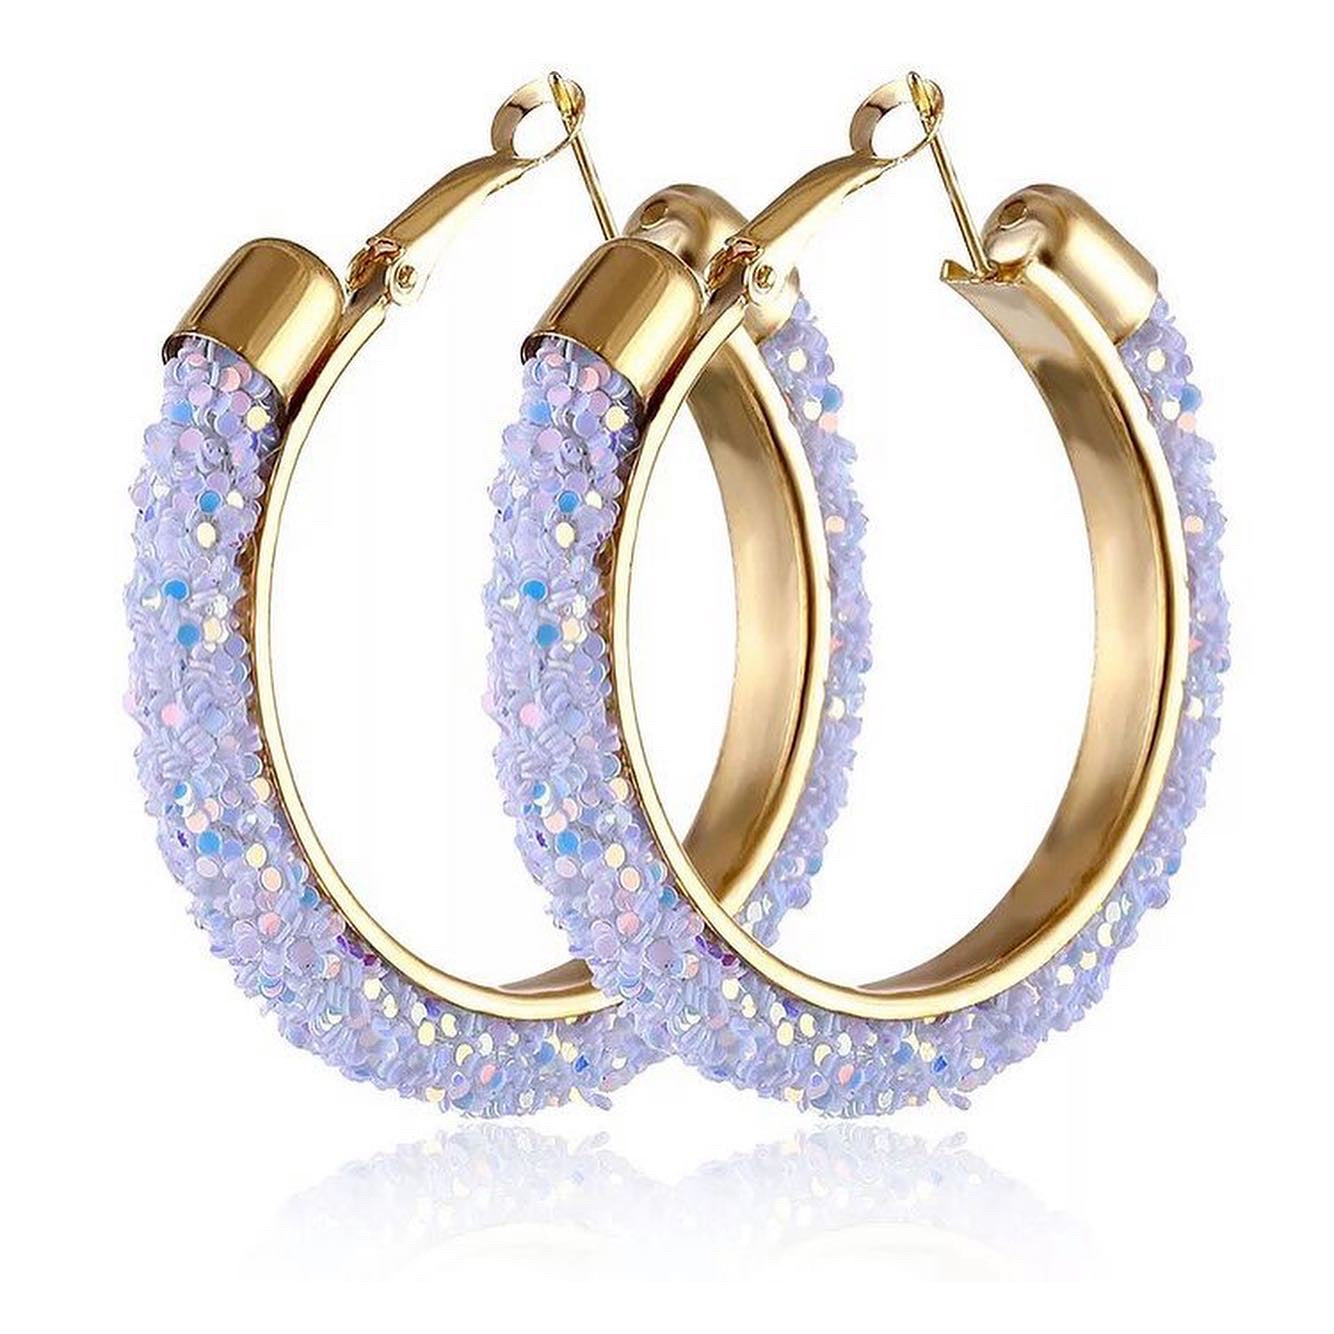 New design Gold color circle earrings Stainless Steel Big Round  Hoop Earrings gifts for women